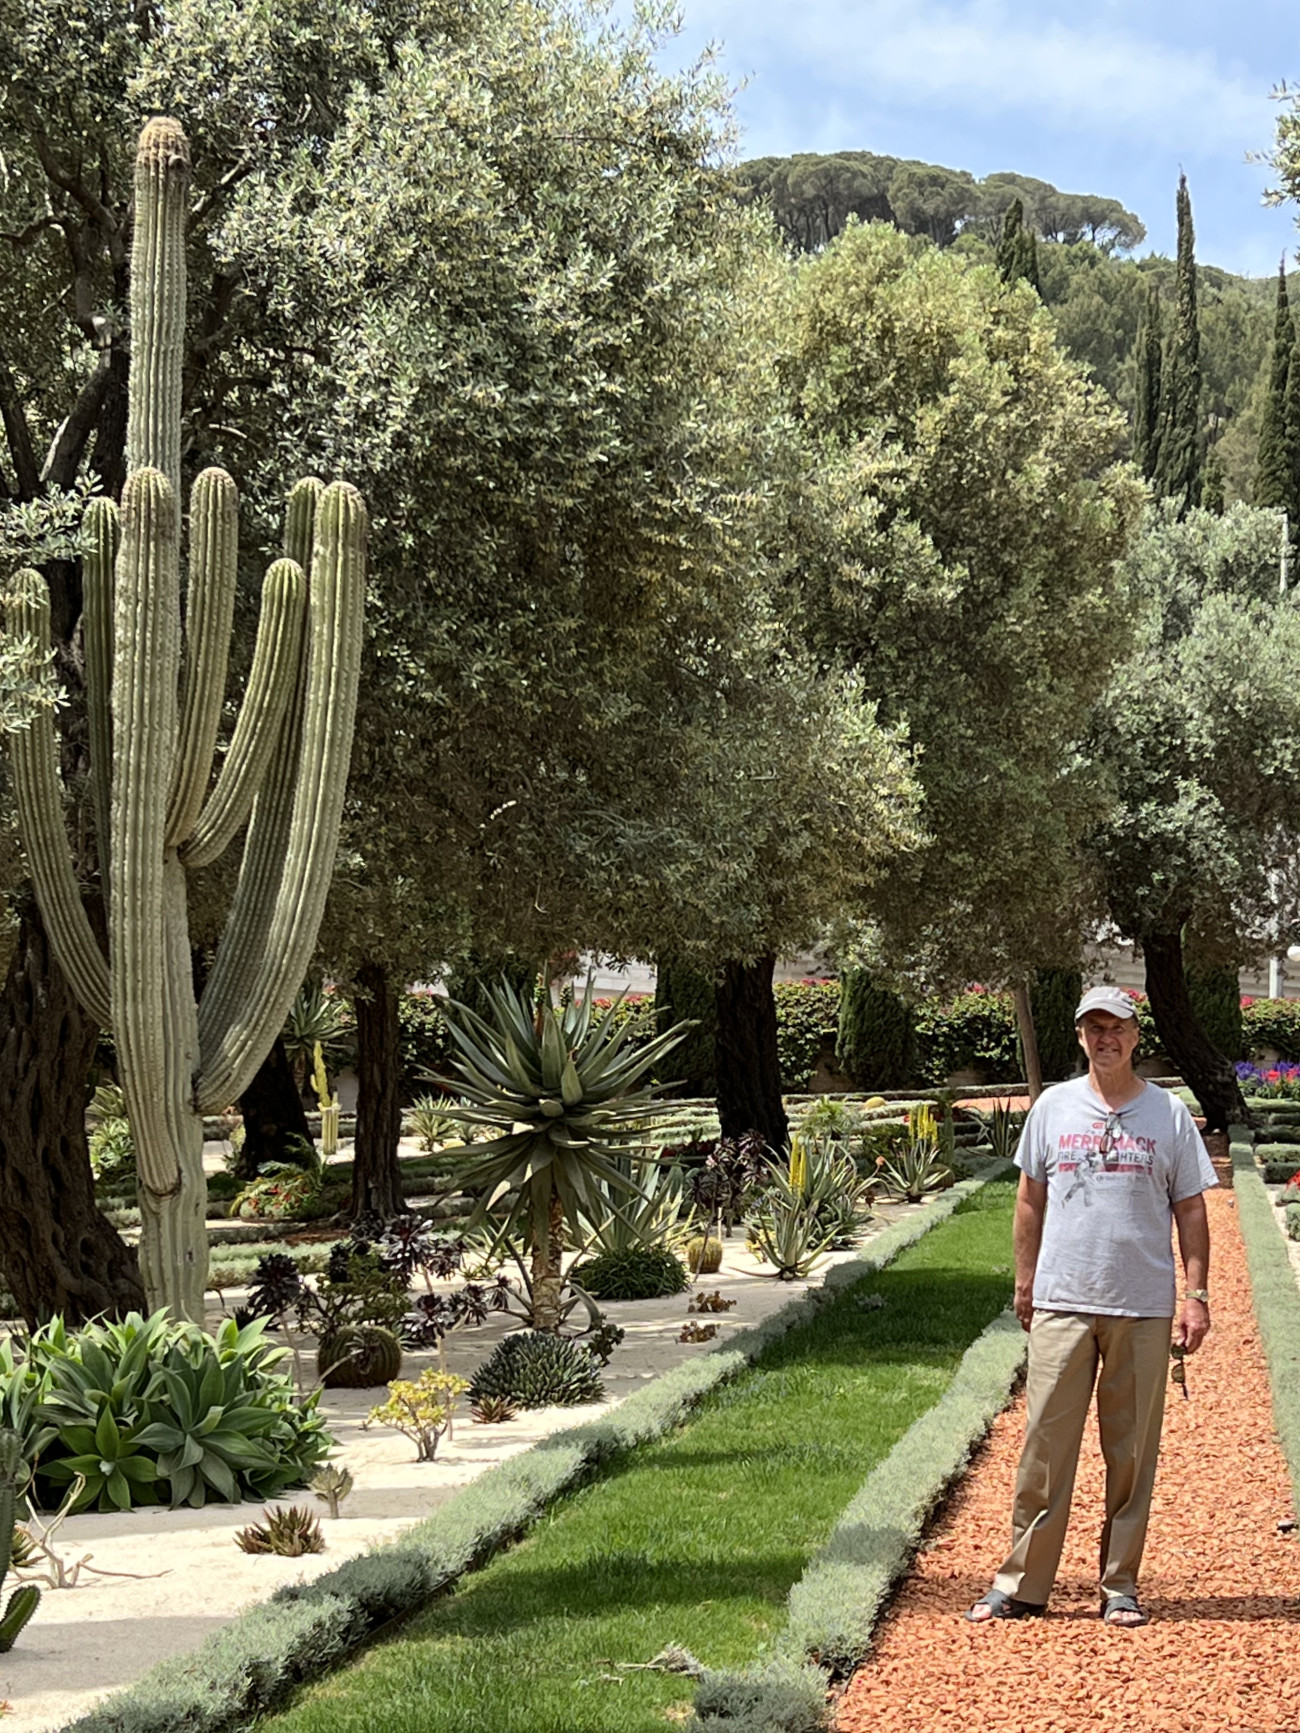 Mike with cactus